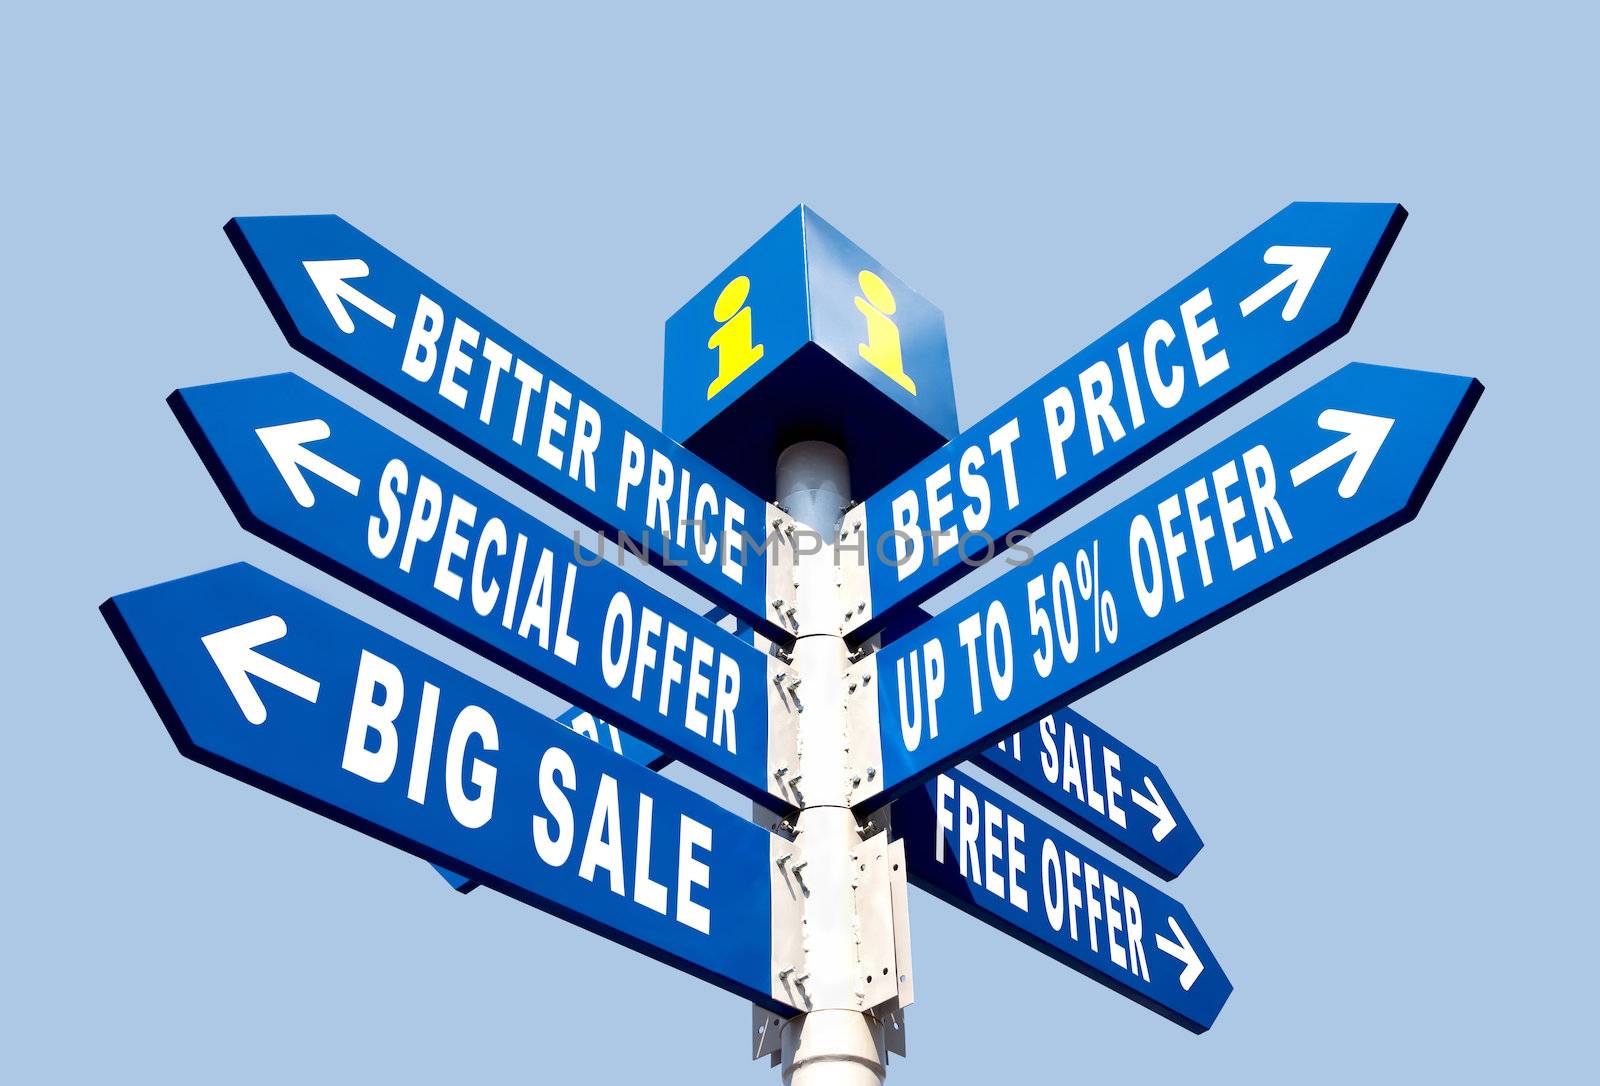 Big Sale, Better Price and Special Offer Directional Road Signs on Blue Sky